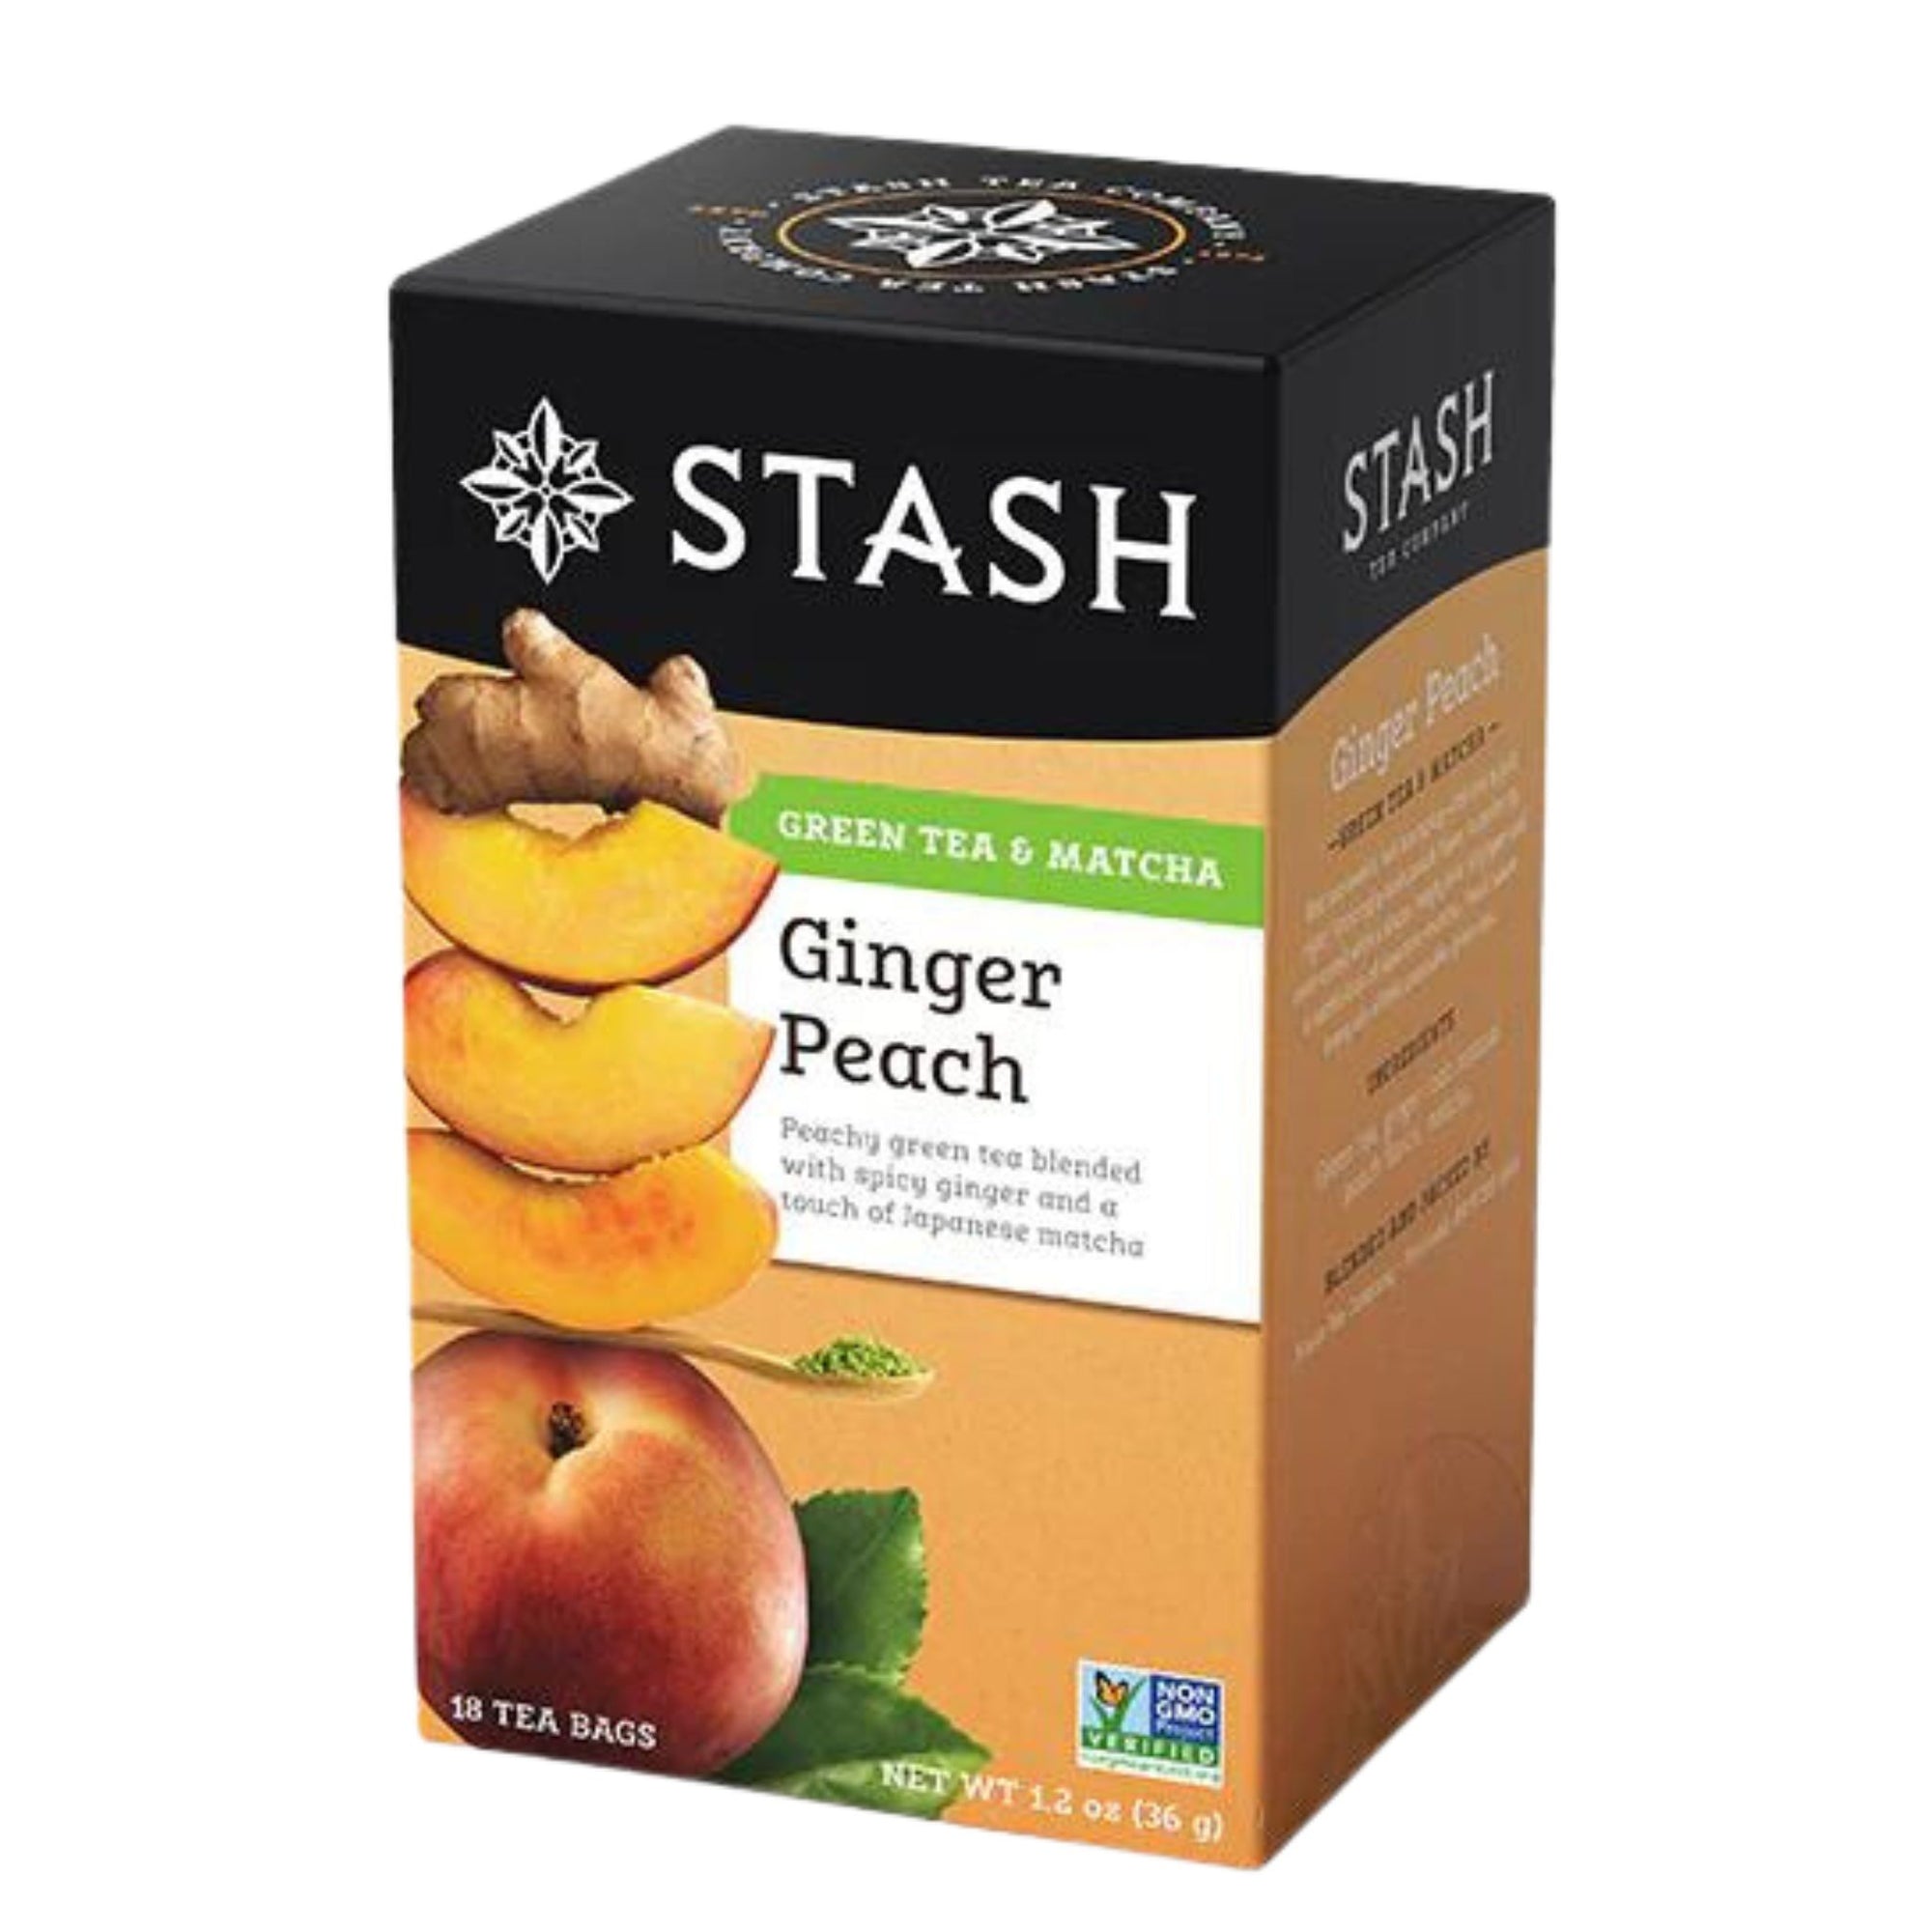 Stash Ginger Peach Green Tea - 18 tea bags in a box - Peachy green tea blended with spicy ginger and a touch of Japanese matcha. 